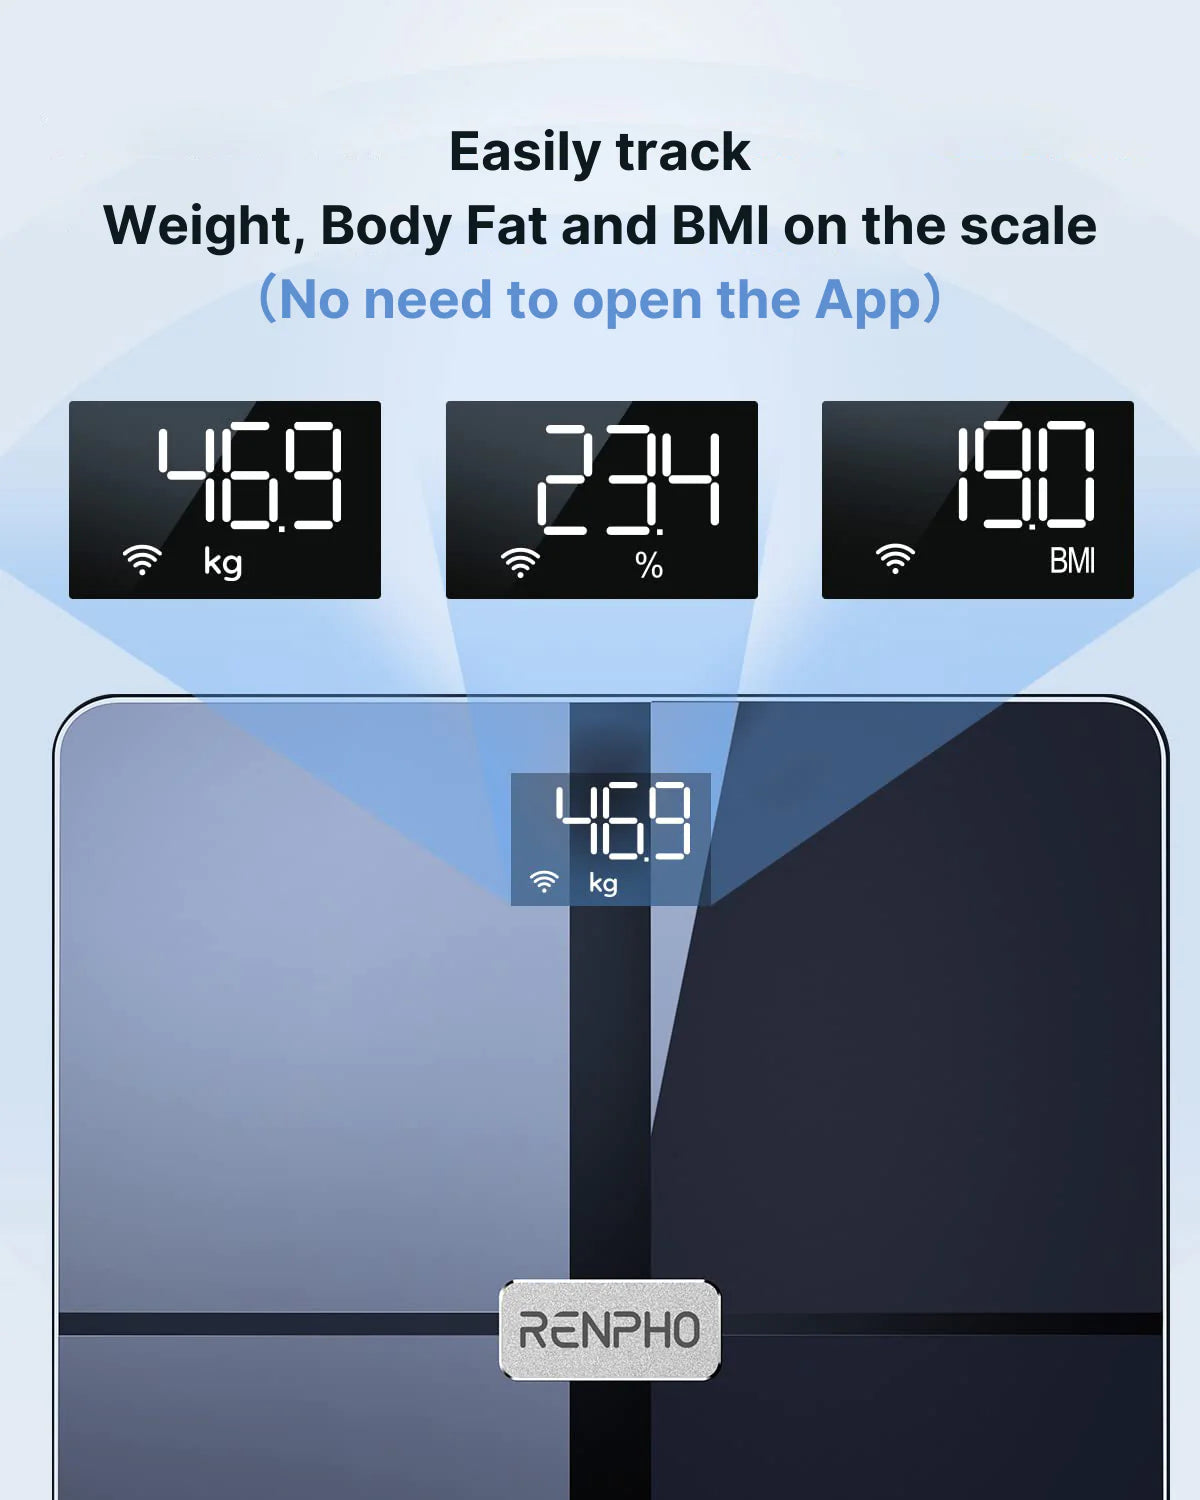 Elis Aspire Smart Body Scale displaying weight, body fat percentage, and BMI to enhance health and fitness without requiring app connectivity.